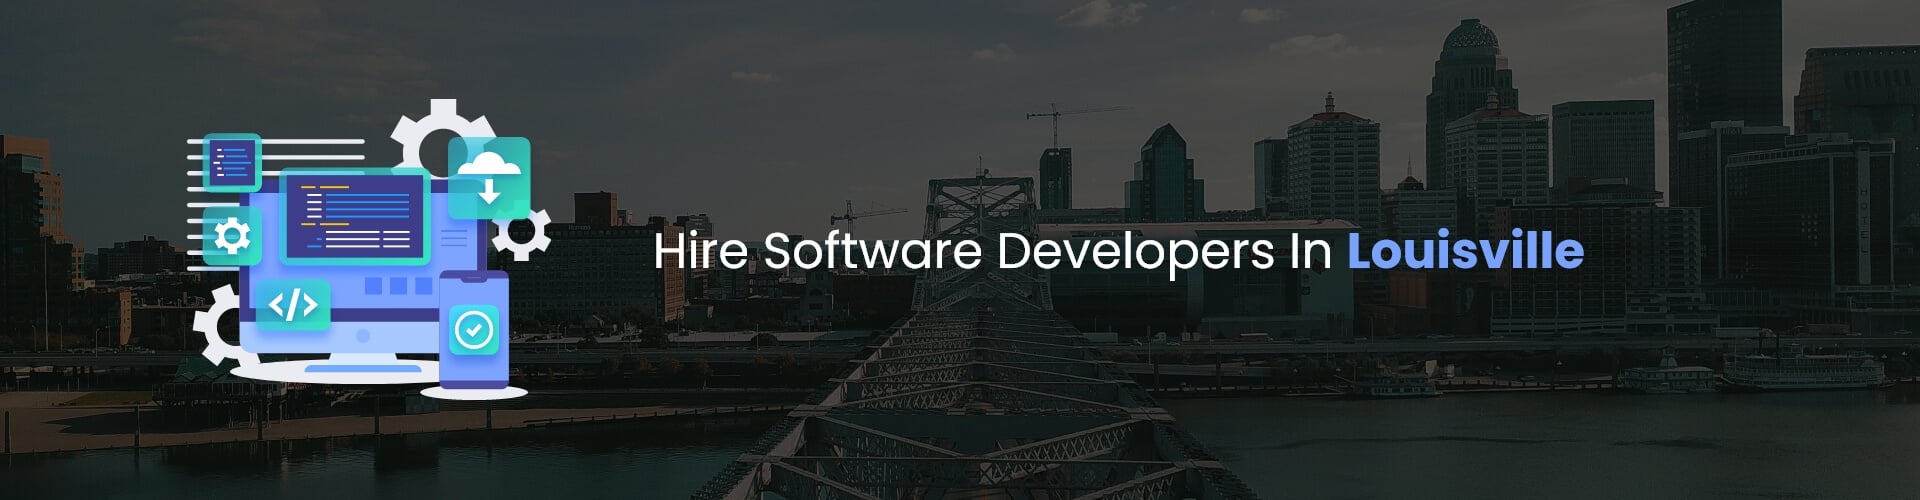 hire software developers in louisville